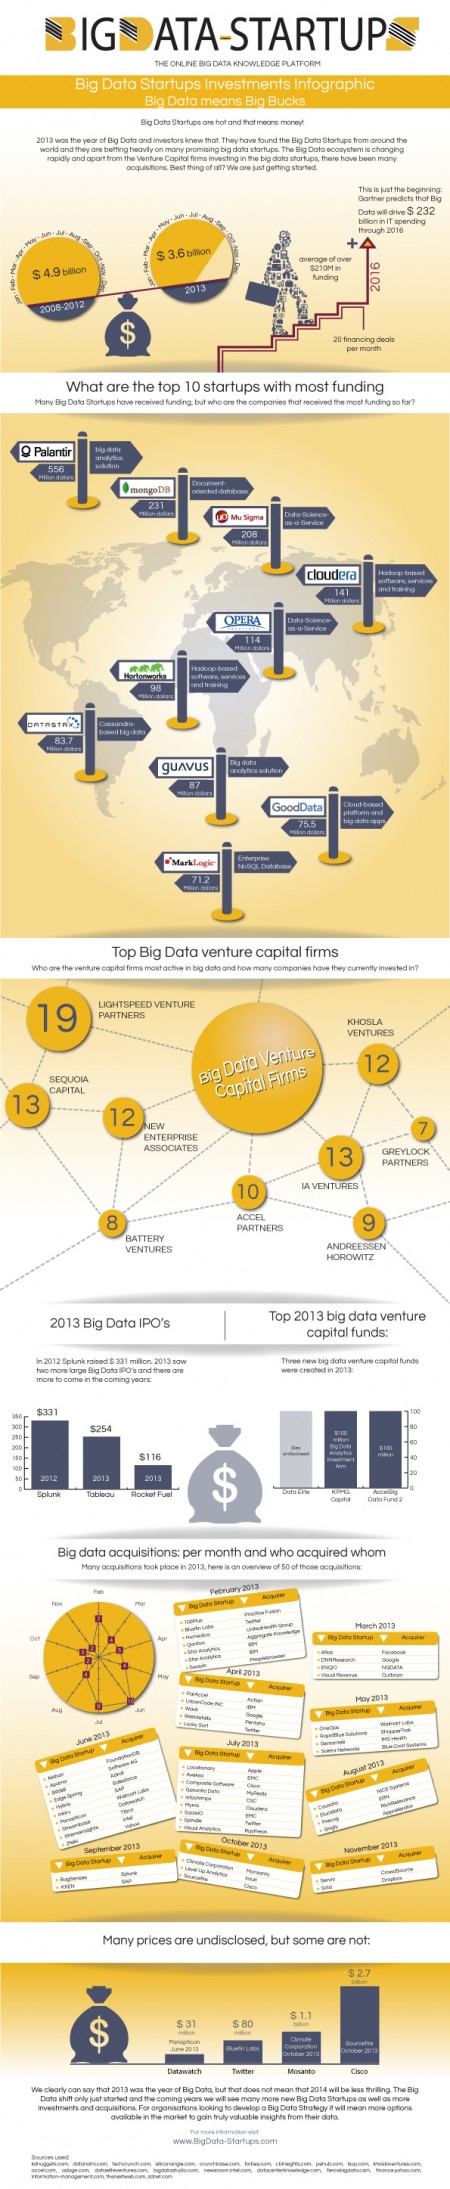 Big Data Starups Investment Infographic - Big Data means Big Buc